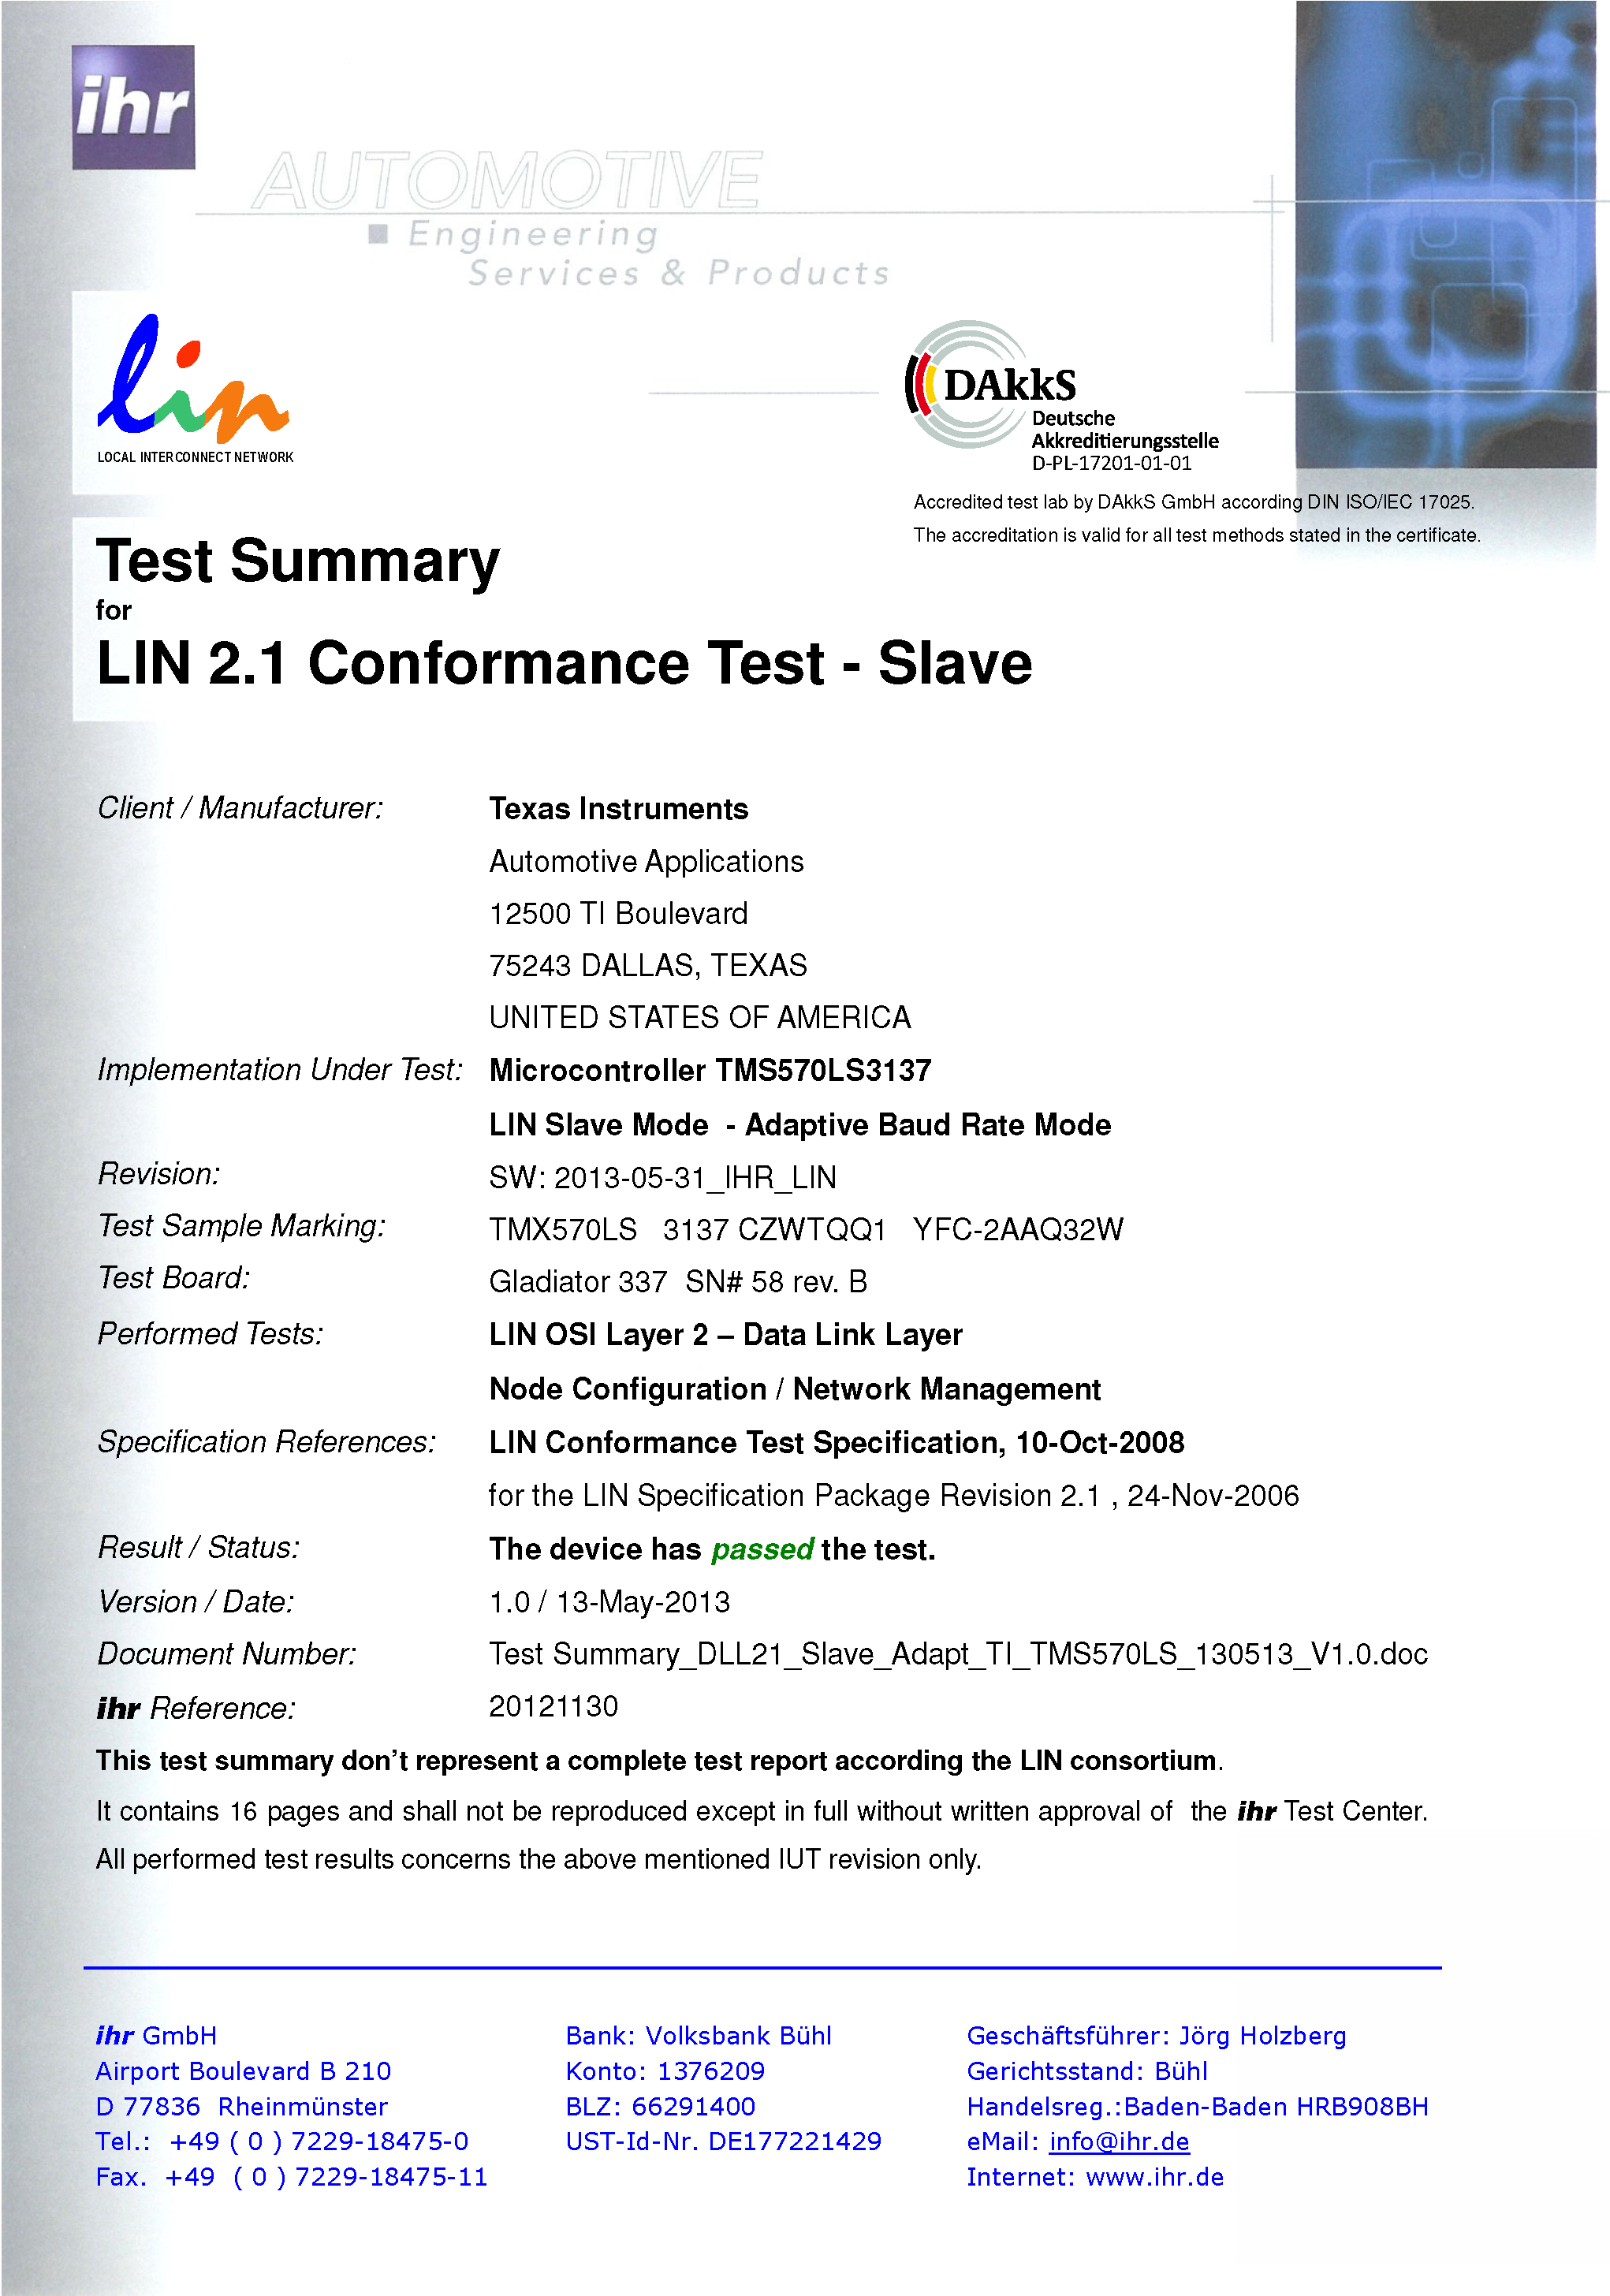 TMS570LC4357 new_LIN_Certification_Slave_Adapt.png